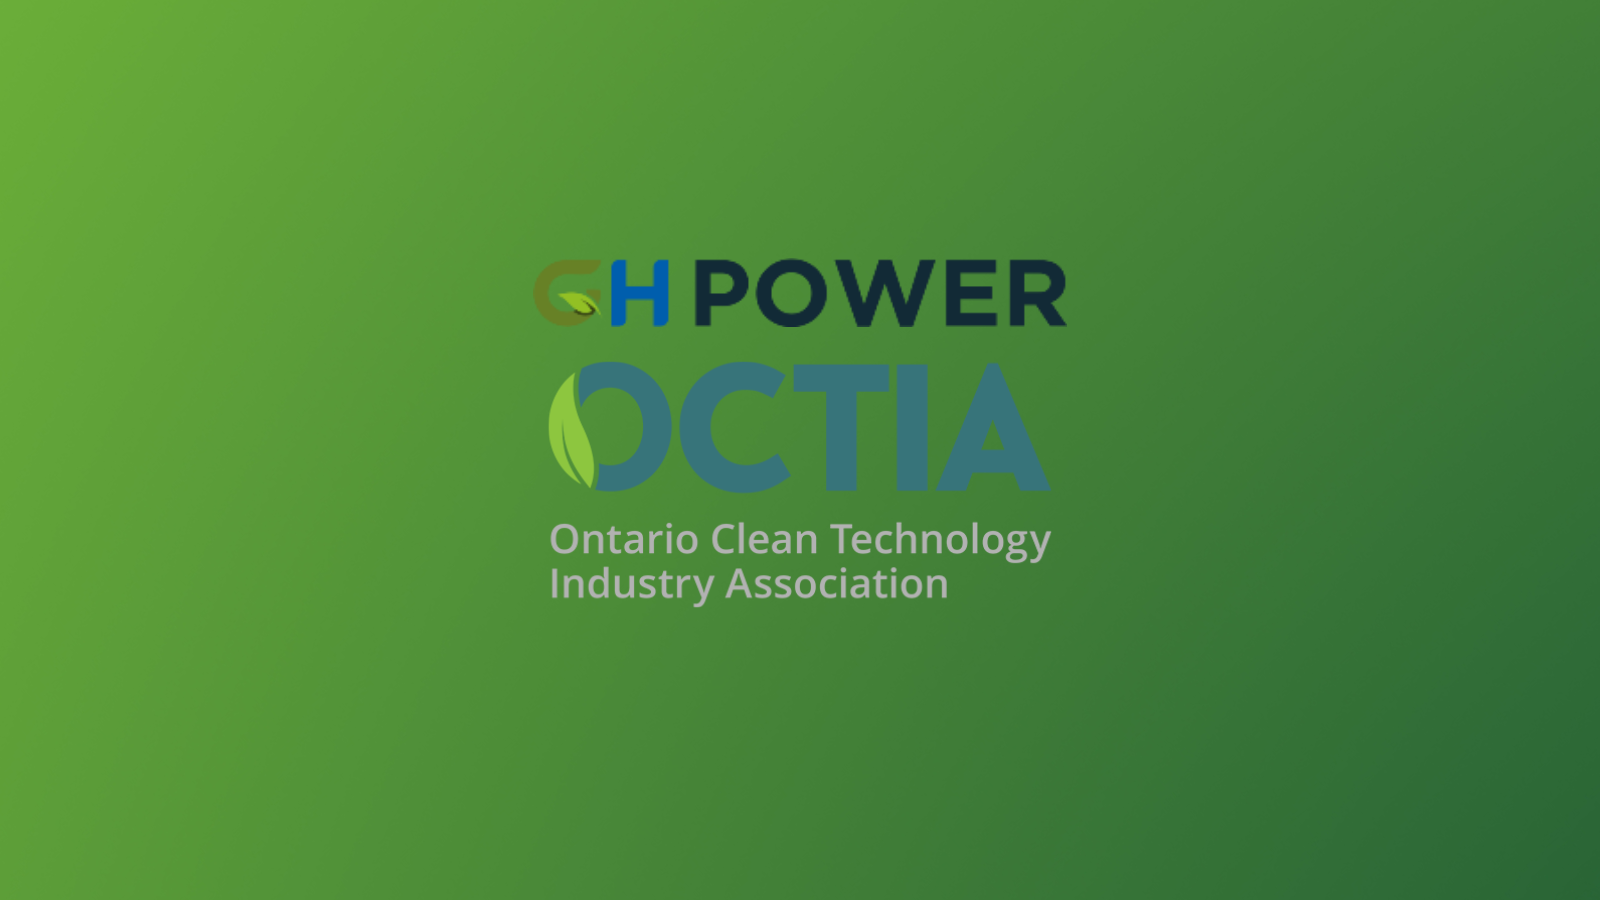 GH Power has secured a $25,000 grant for R&D support from the Ontario Clean Technology Industry Association